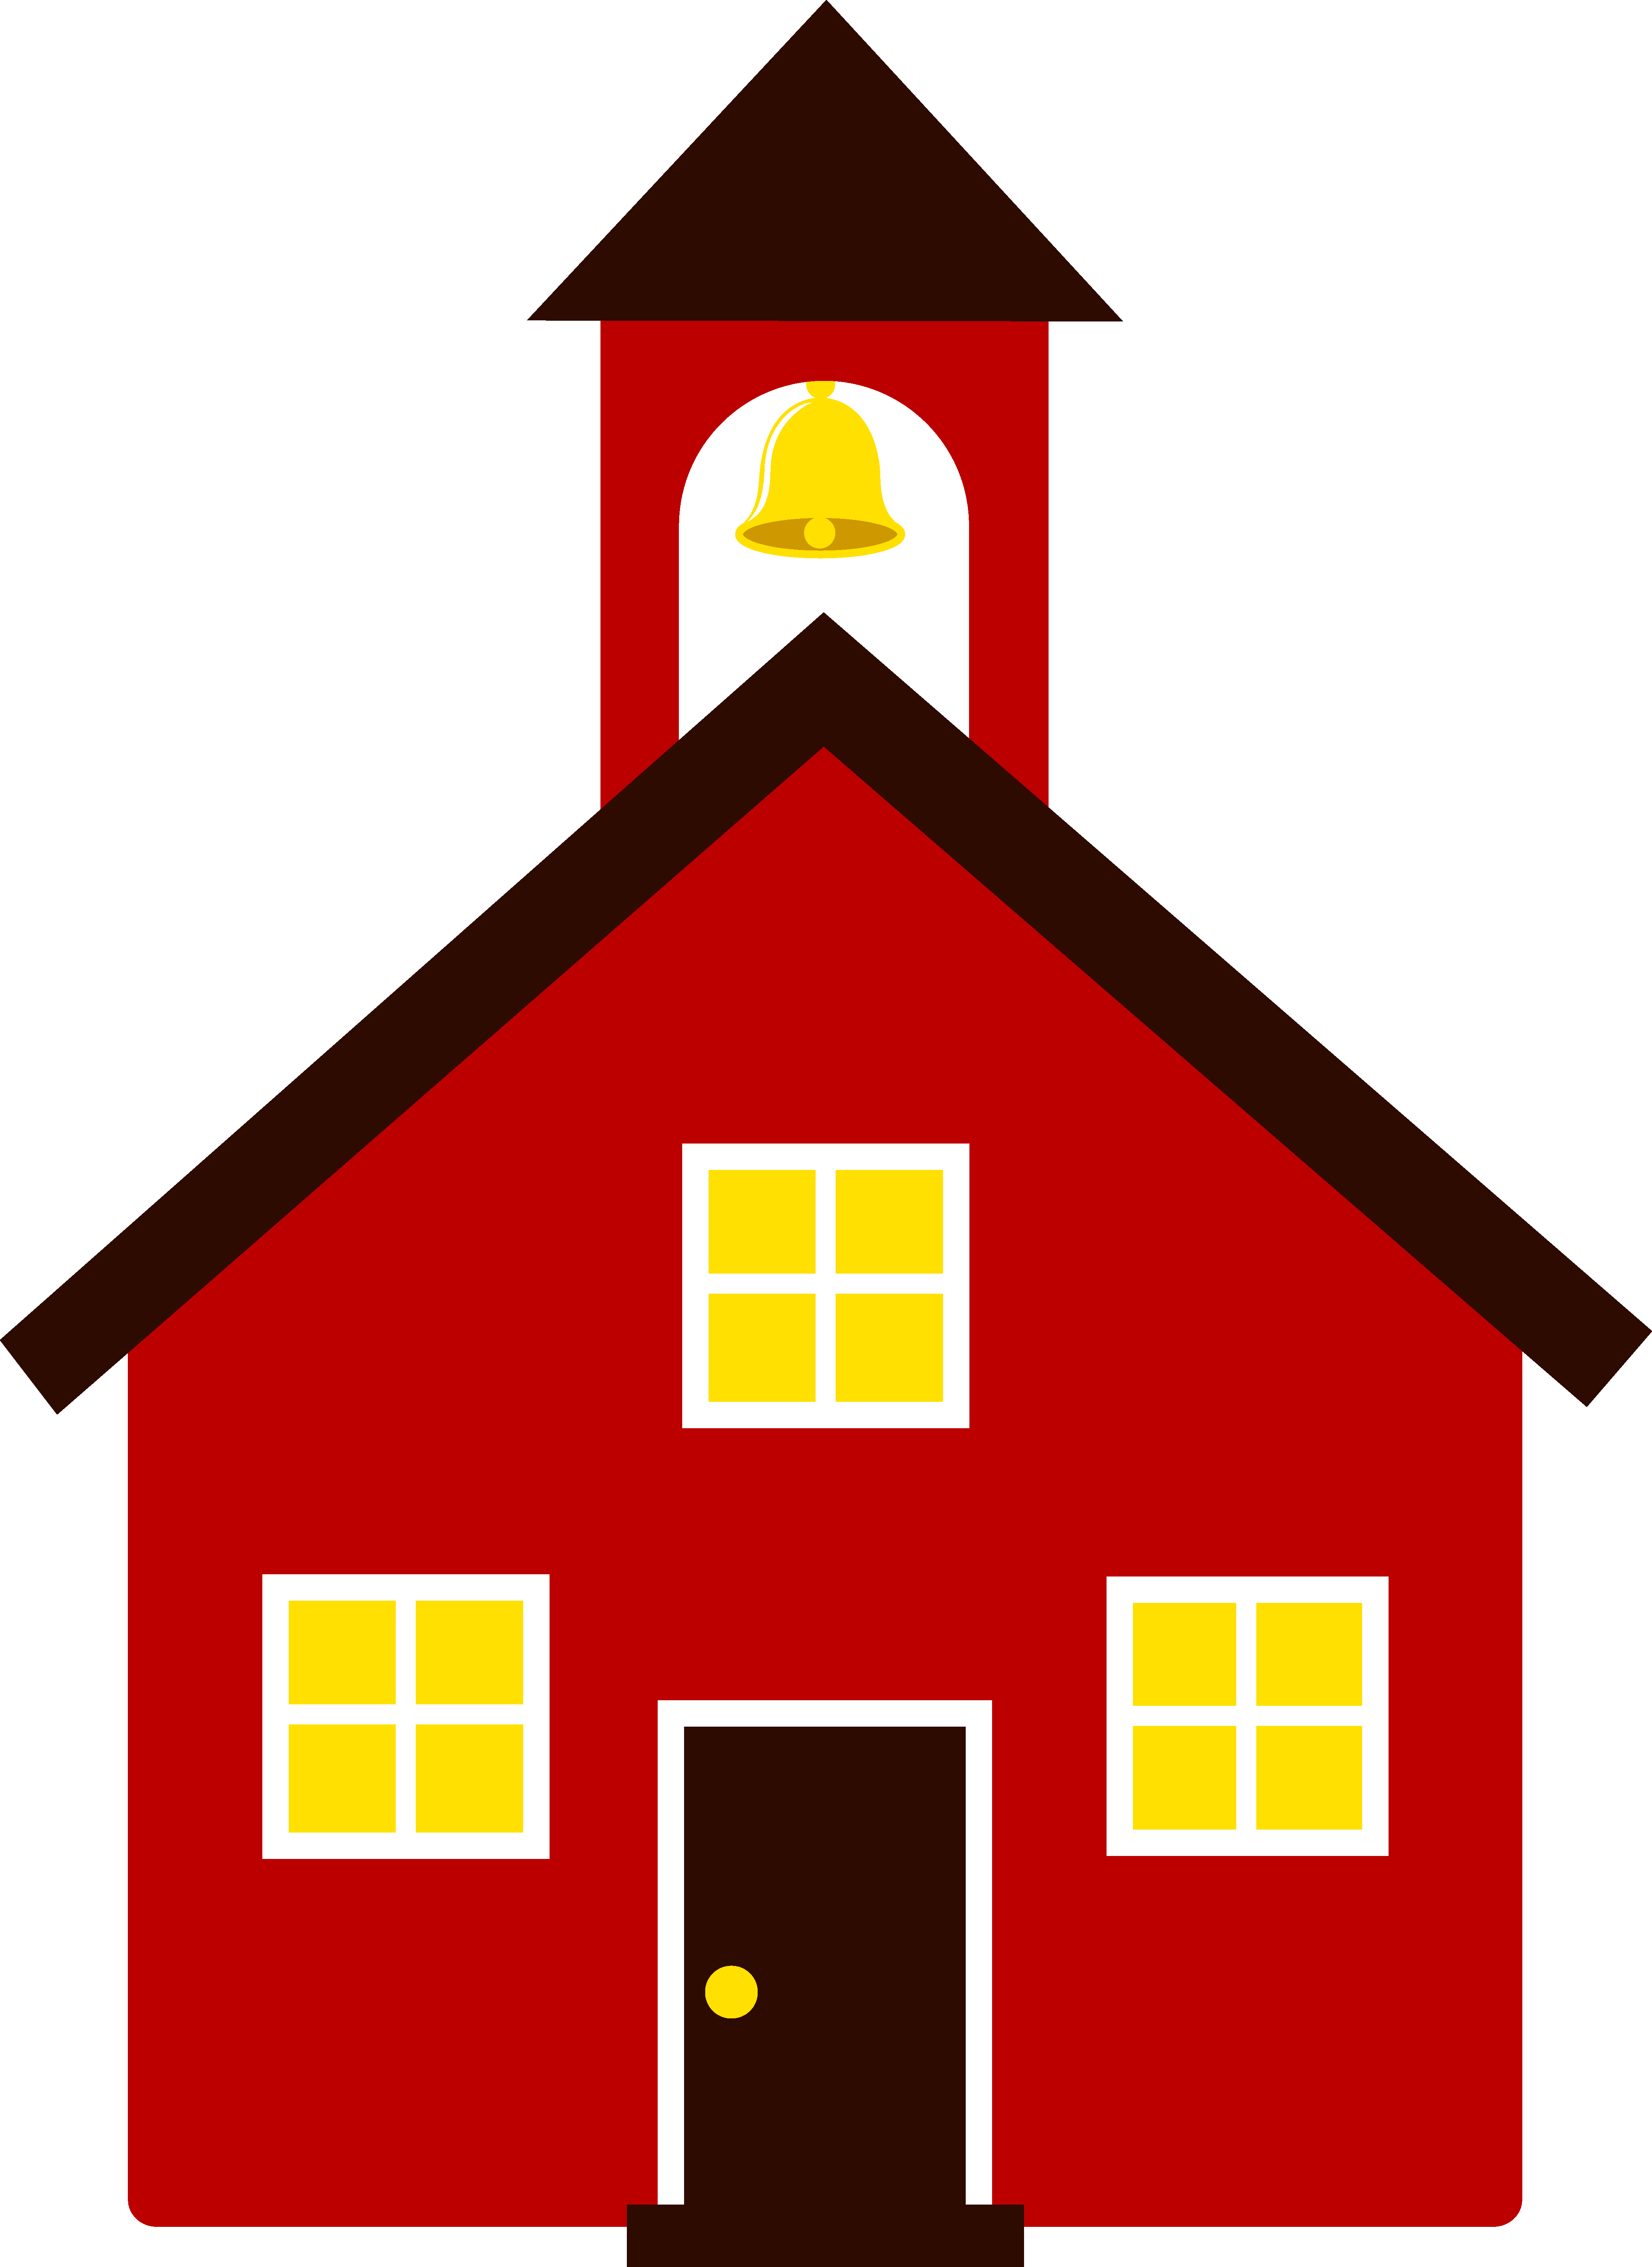 Free School House, Download Free Clip Art, Free Clip Art on.